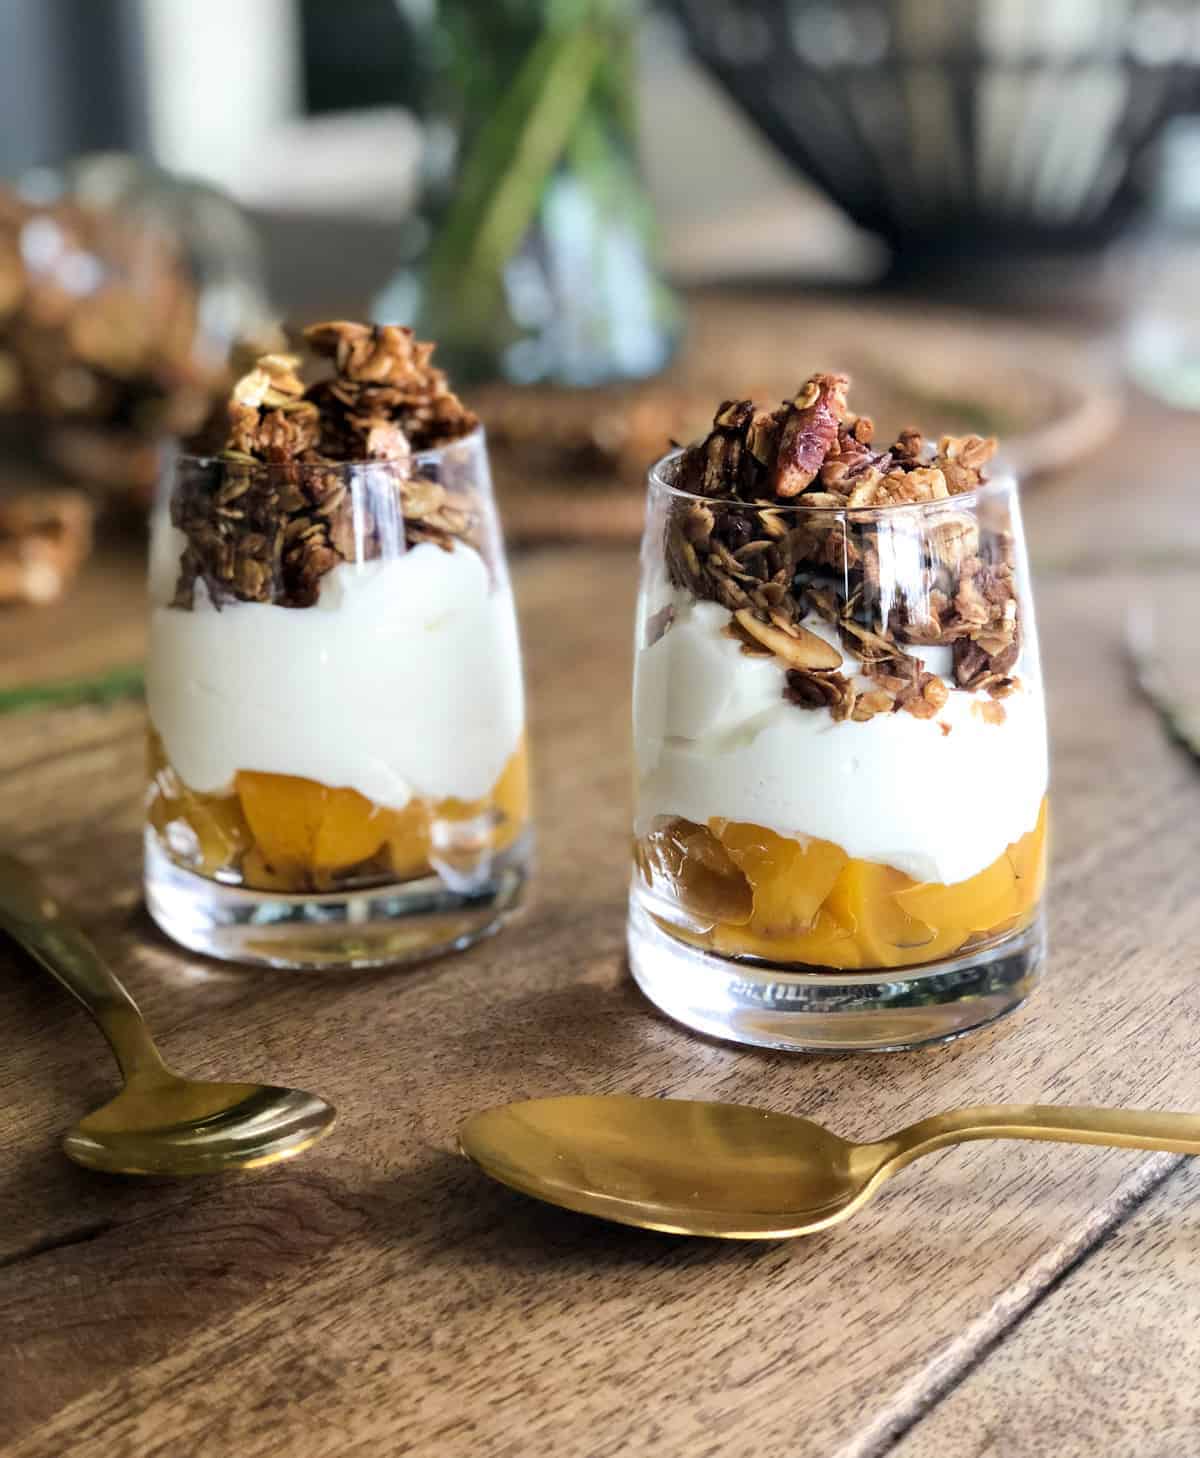 this recipe with canned peaches is a parfait in a clear glass with canned peaches on the bottom,  yogurt, and granola.